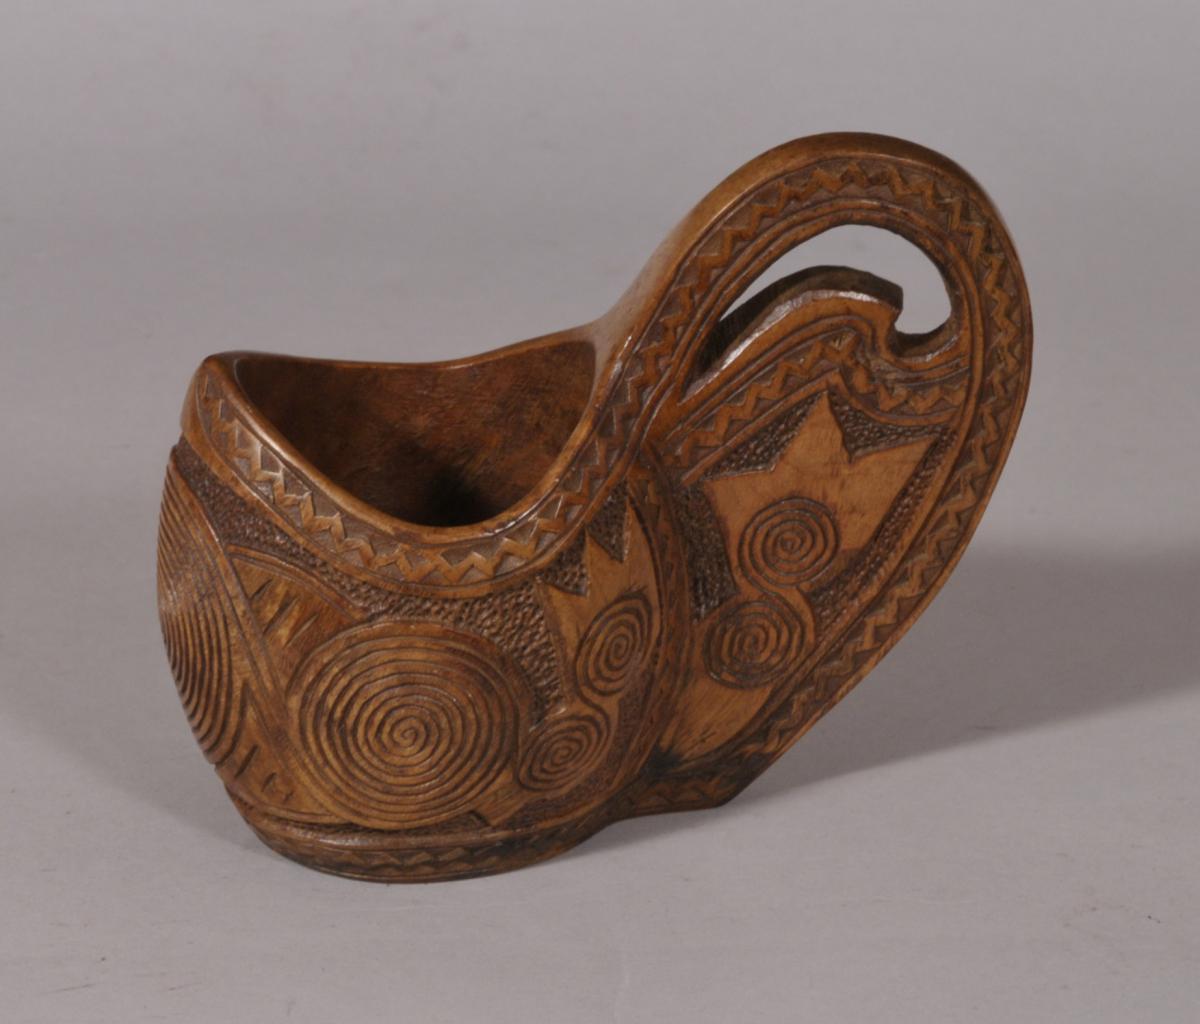 S/4647 Antique Treen 19th Century Romanian Fruitwood Shepherd's Cup or Dipper